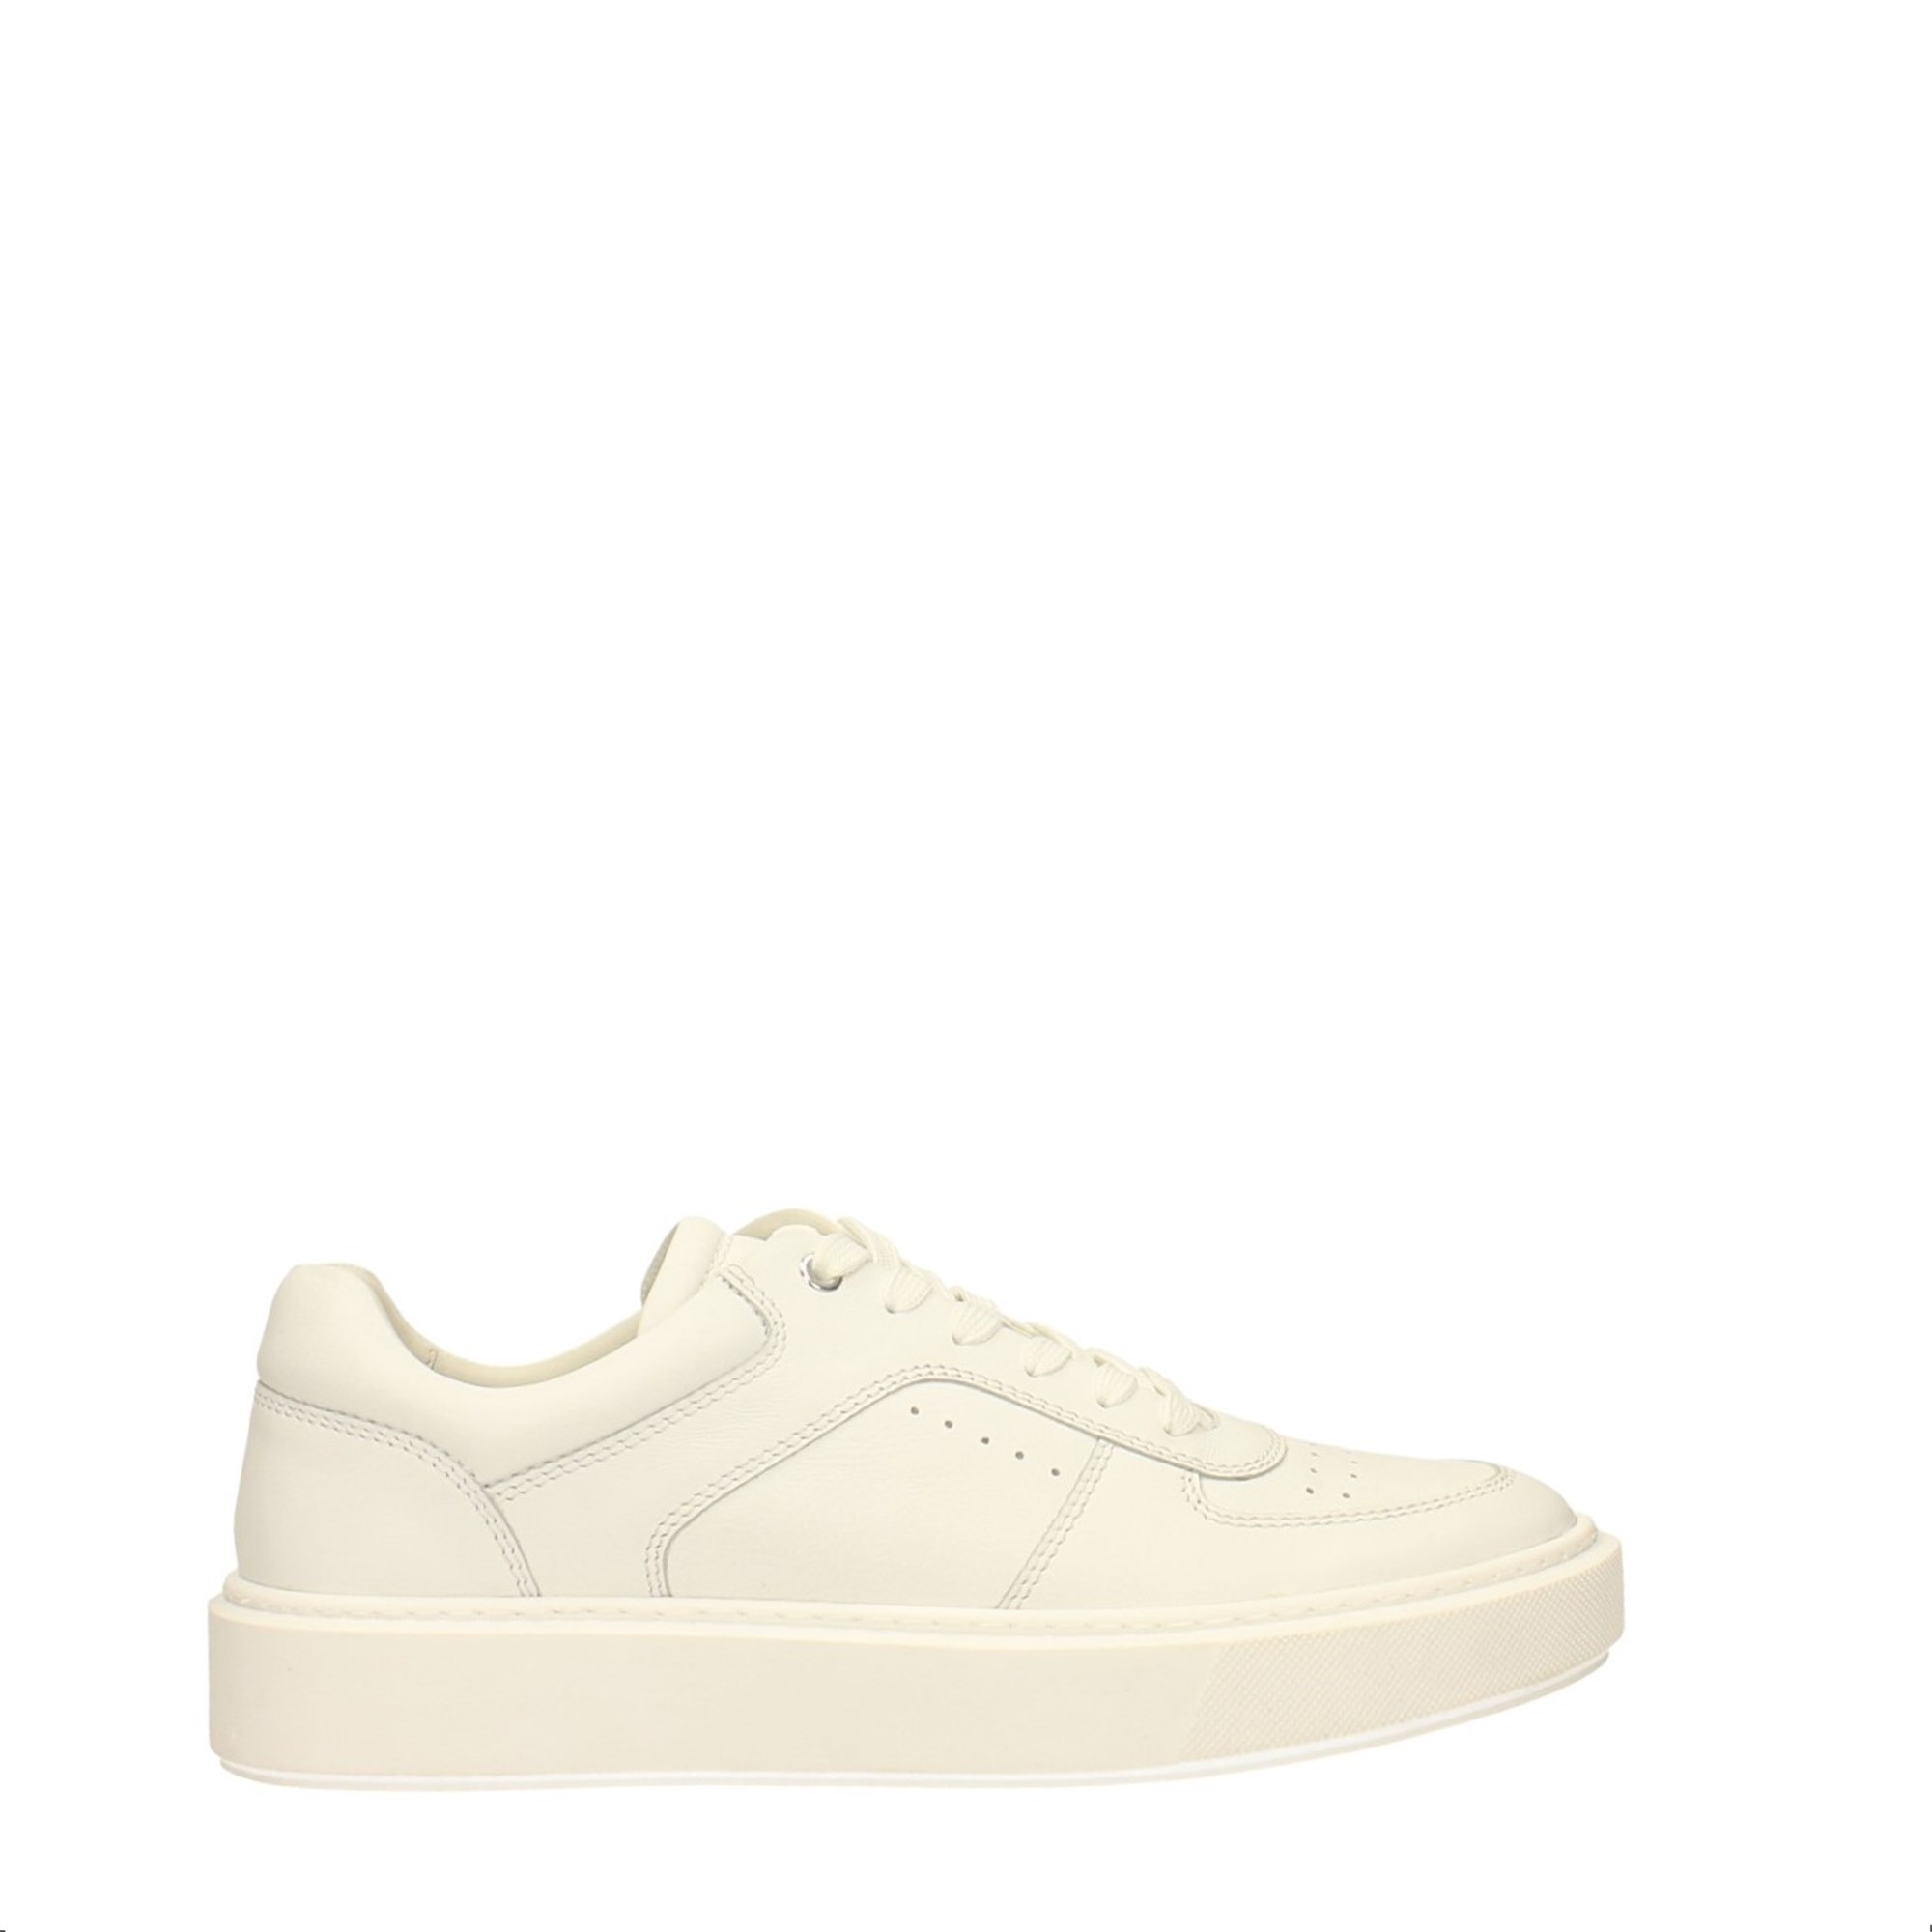 Sneakers bianche in vera pelle Outlet Sconti Online